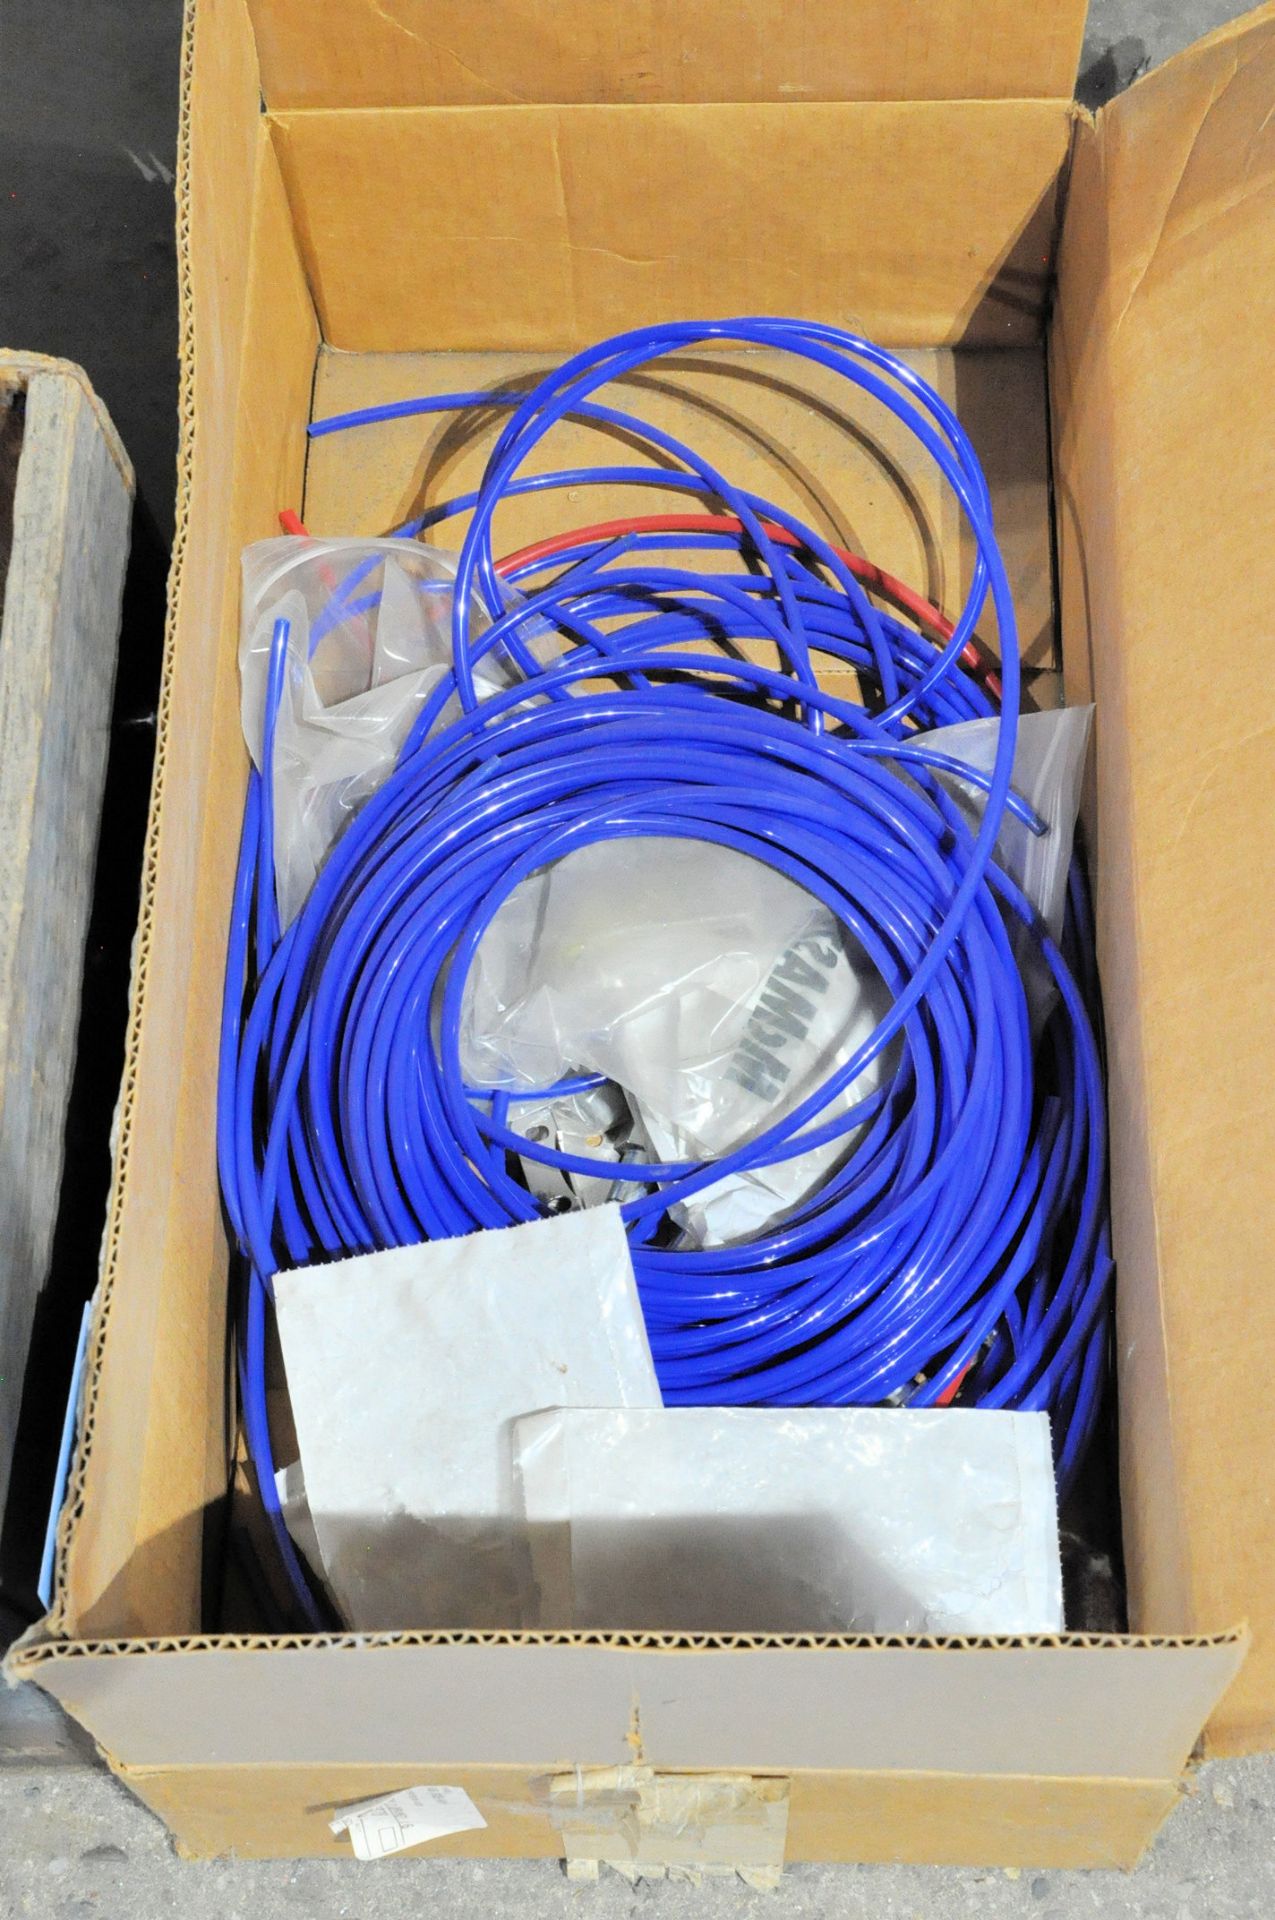 Lot-Stainless Steel Fittings, Valves, Plastic Tubing, etc. in (3) Boxes on Floor - Image 4 of 4